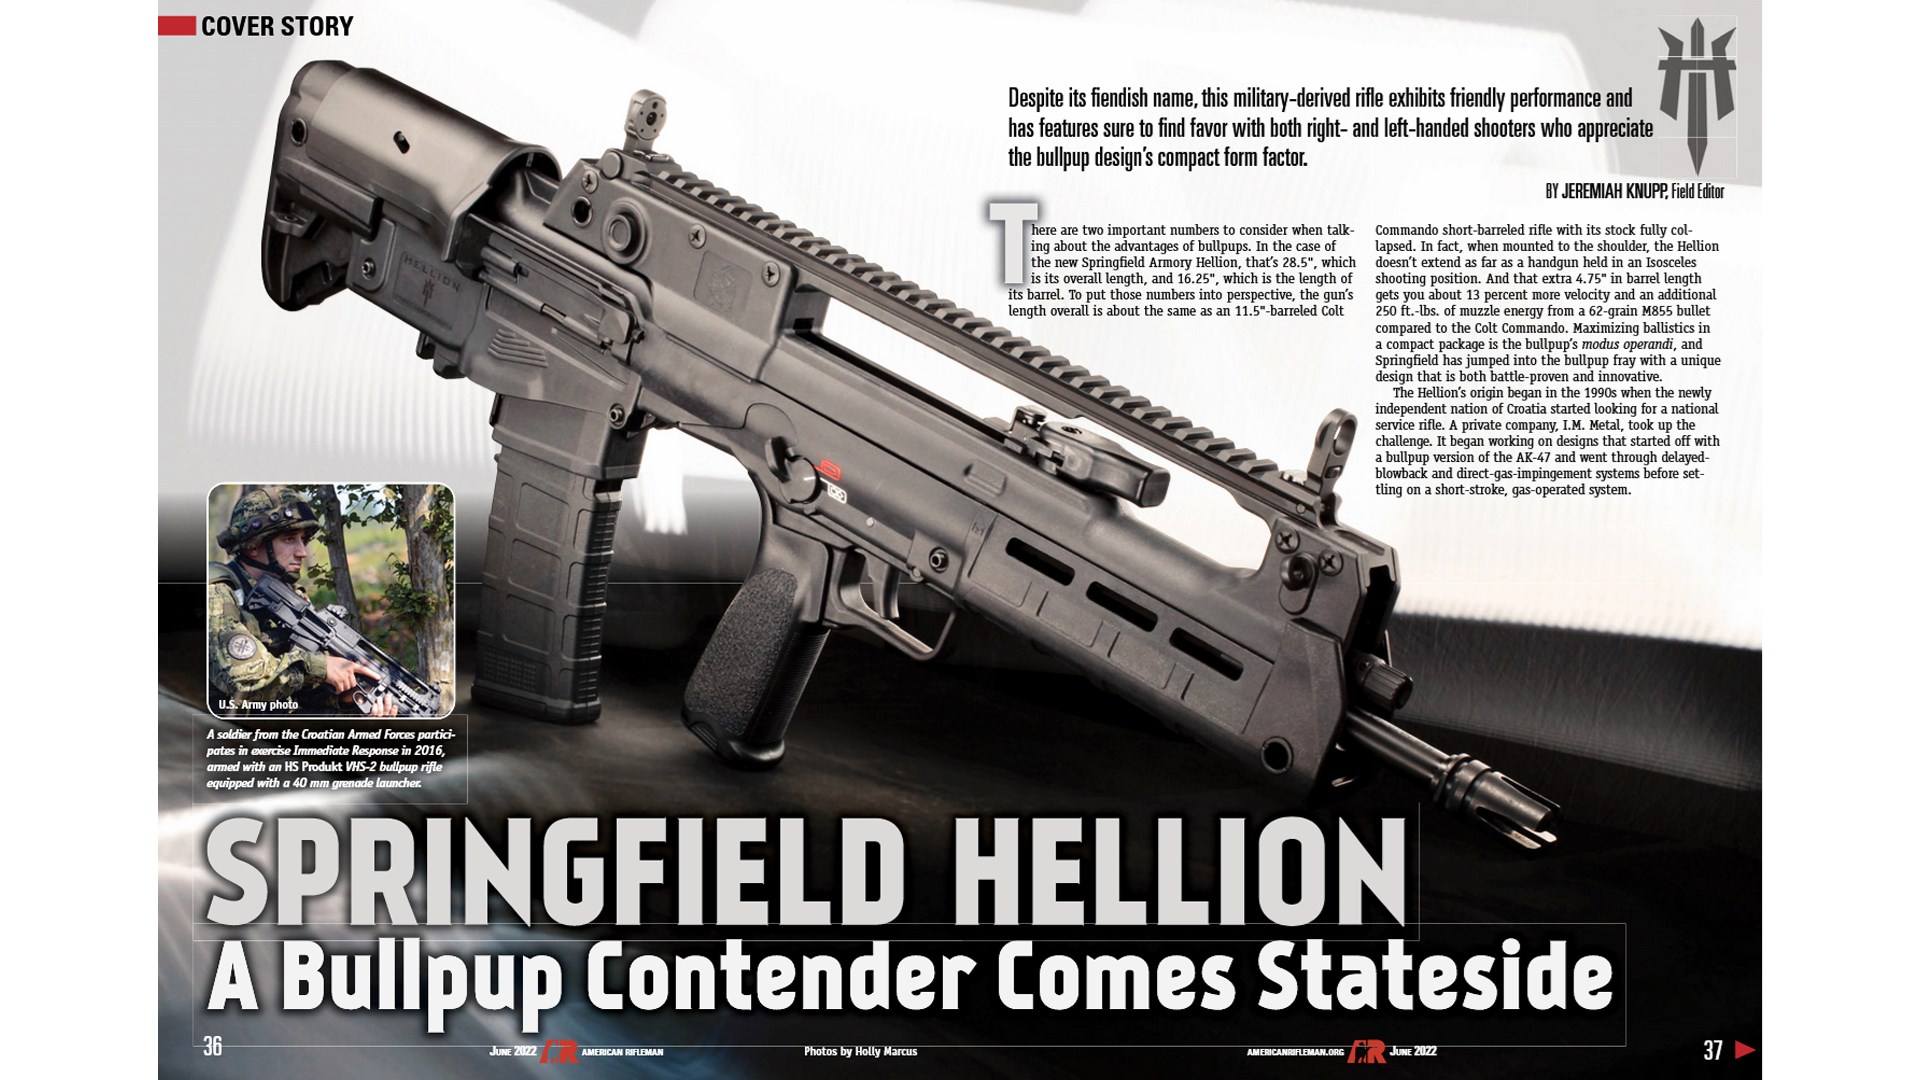 Magazine centerfold Springfield Armory Hellion bullpup rifle shown center with text surrounding descrinbing history and the gun